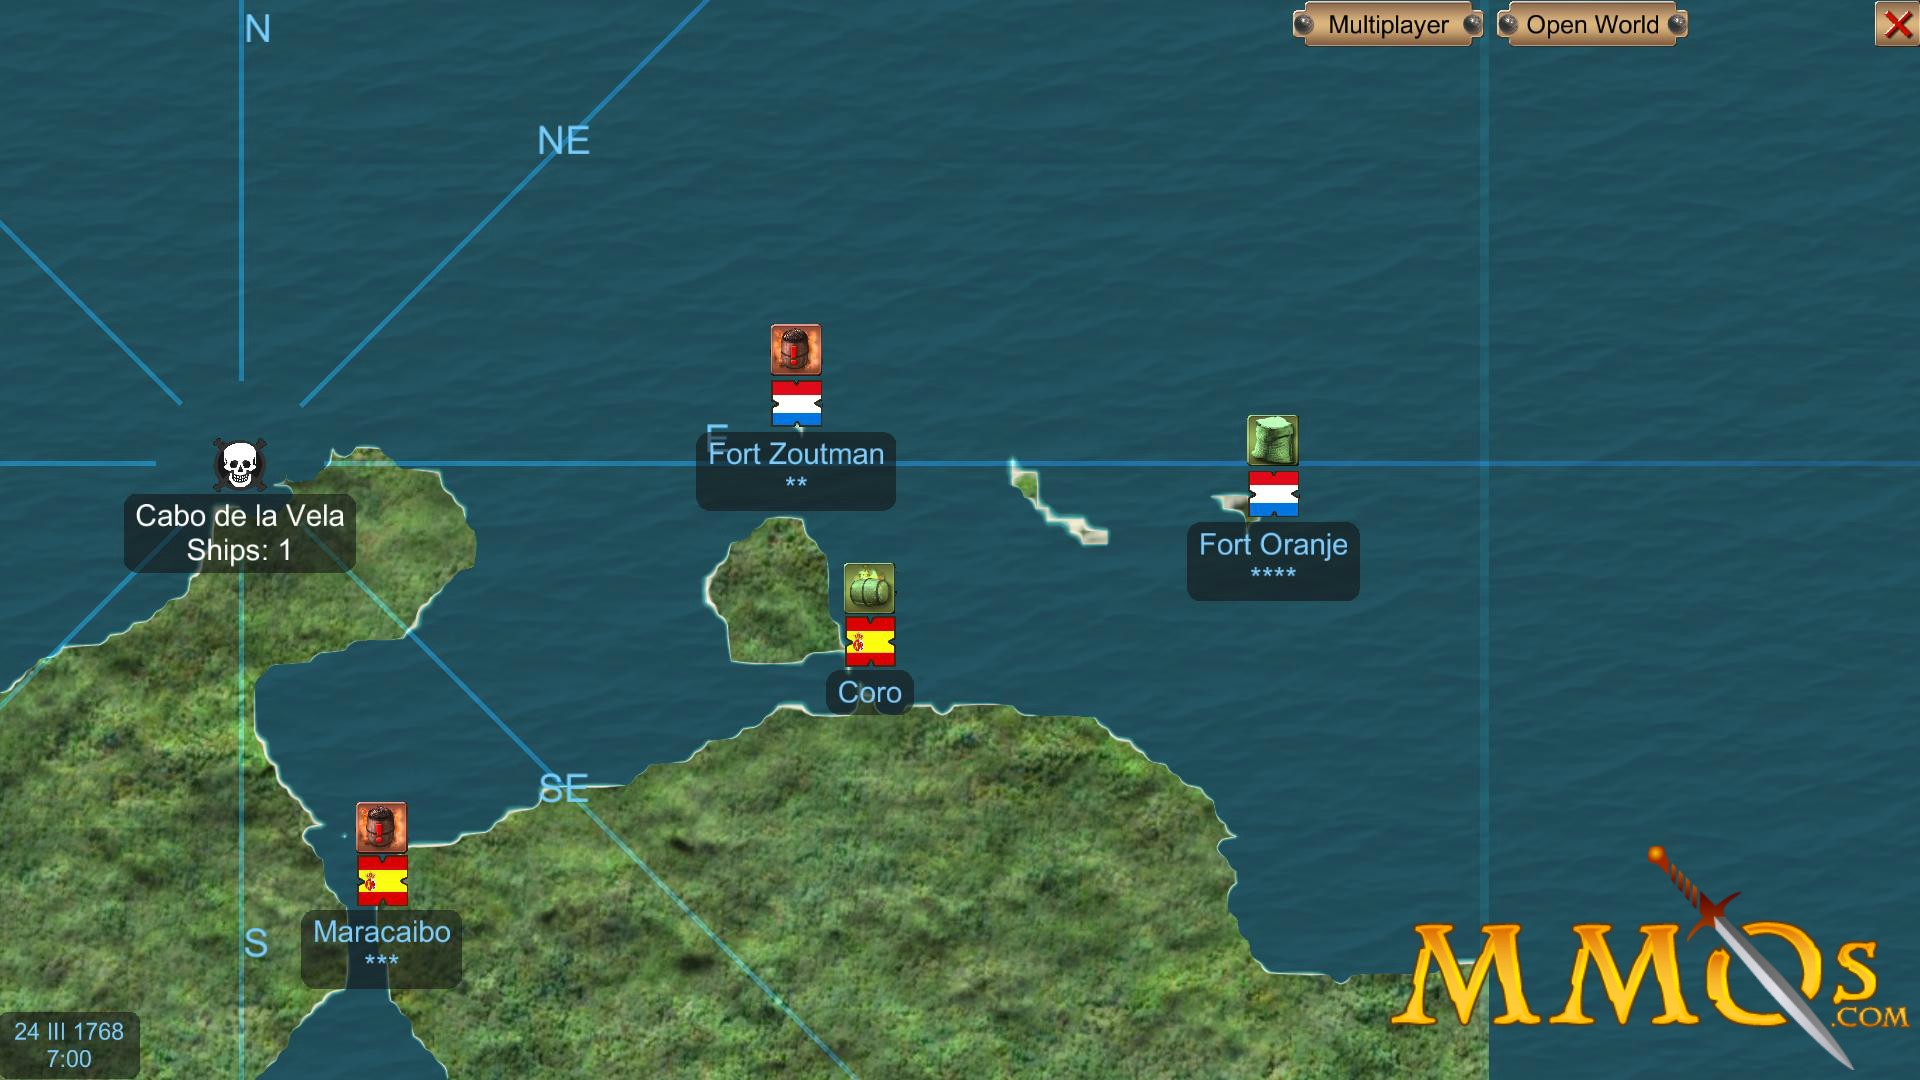 the pirate caribbean hunt map shows a tresure located about 36 miles north of barranquilla port